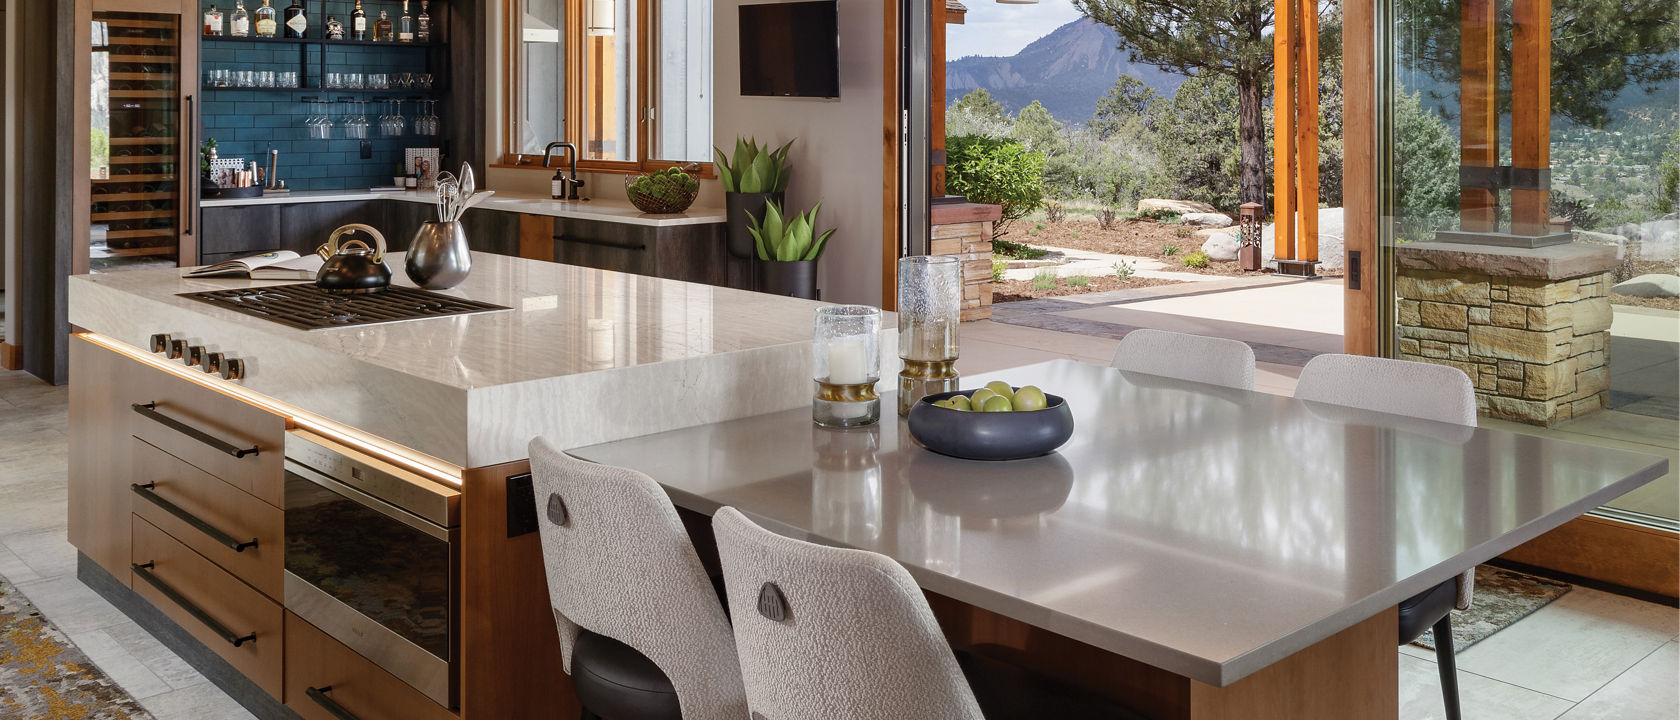 A warm and moody kitchen island with a modern built in stove and hood in the island, pull out drawers from the oak cabinets, side table next to the island with two white chairs, and a gorgeous view of the mountains and patio area. 